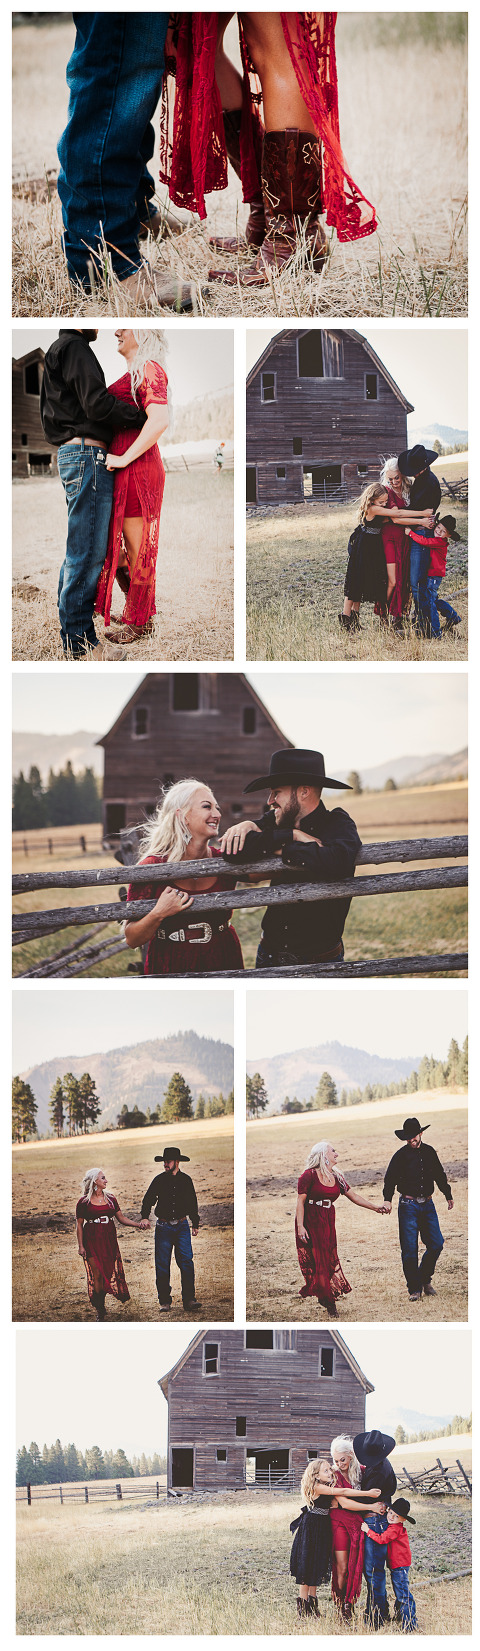 Dunford Barn Engagement Photography with Ryan & Amber by Hailey Haberman Photography in Ellensburg WA at the Cattle Barn